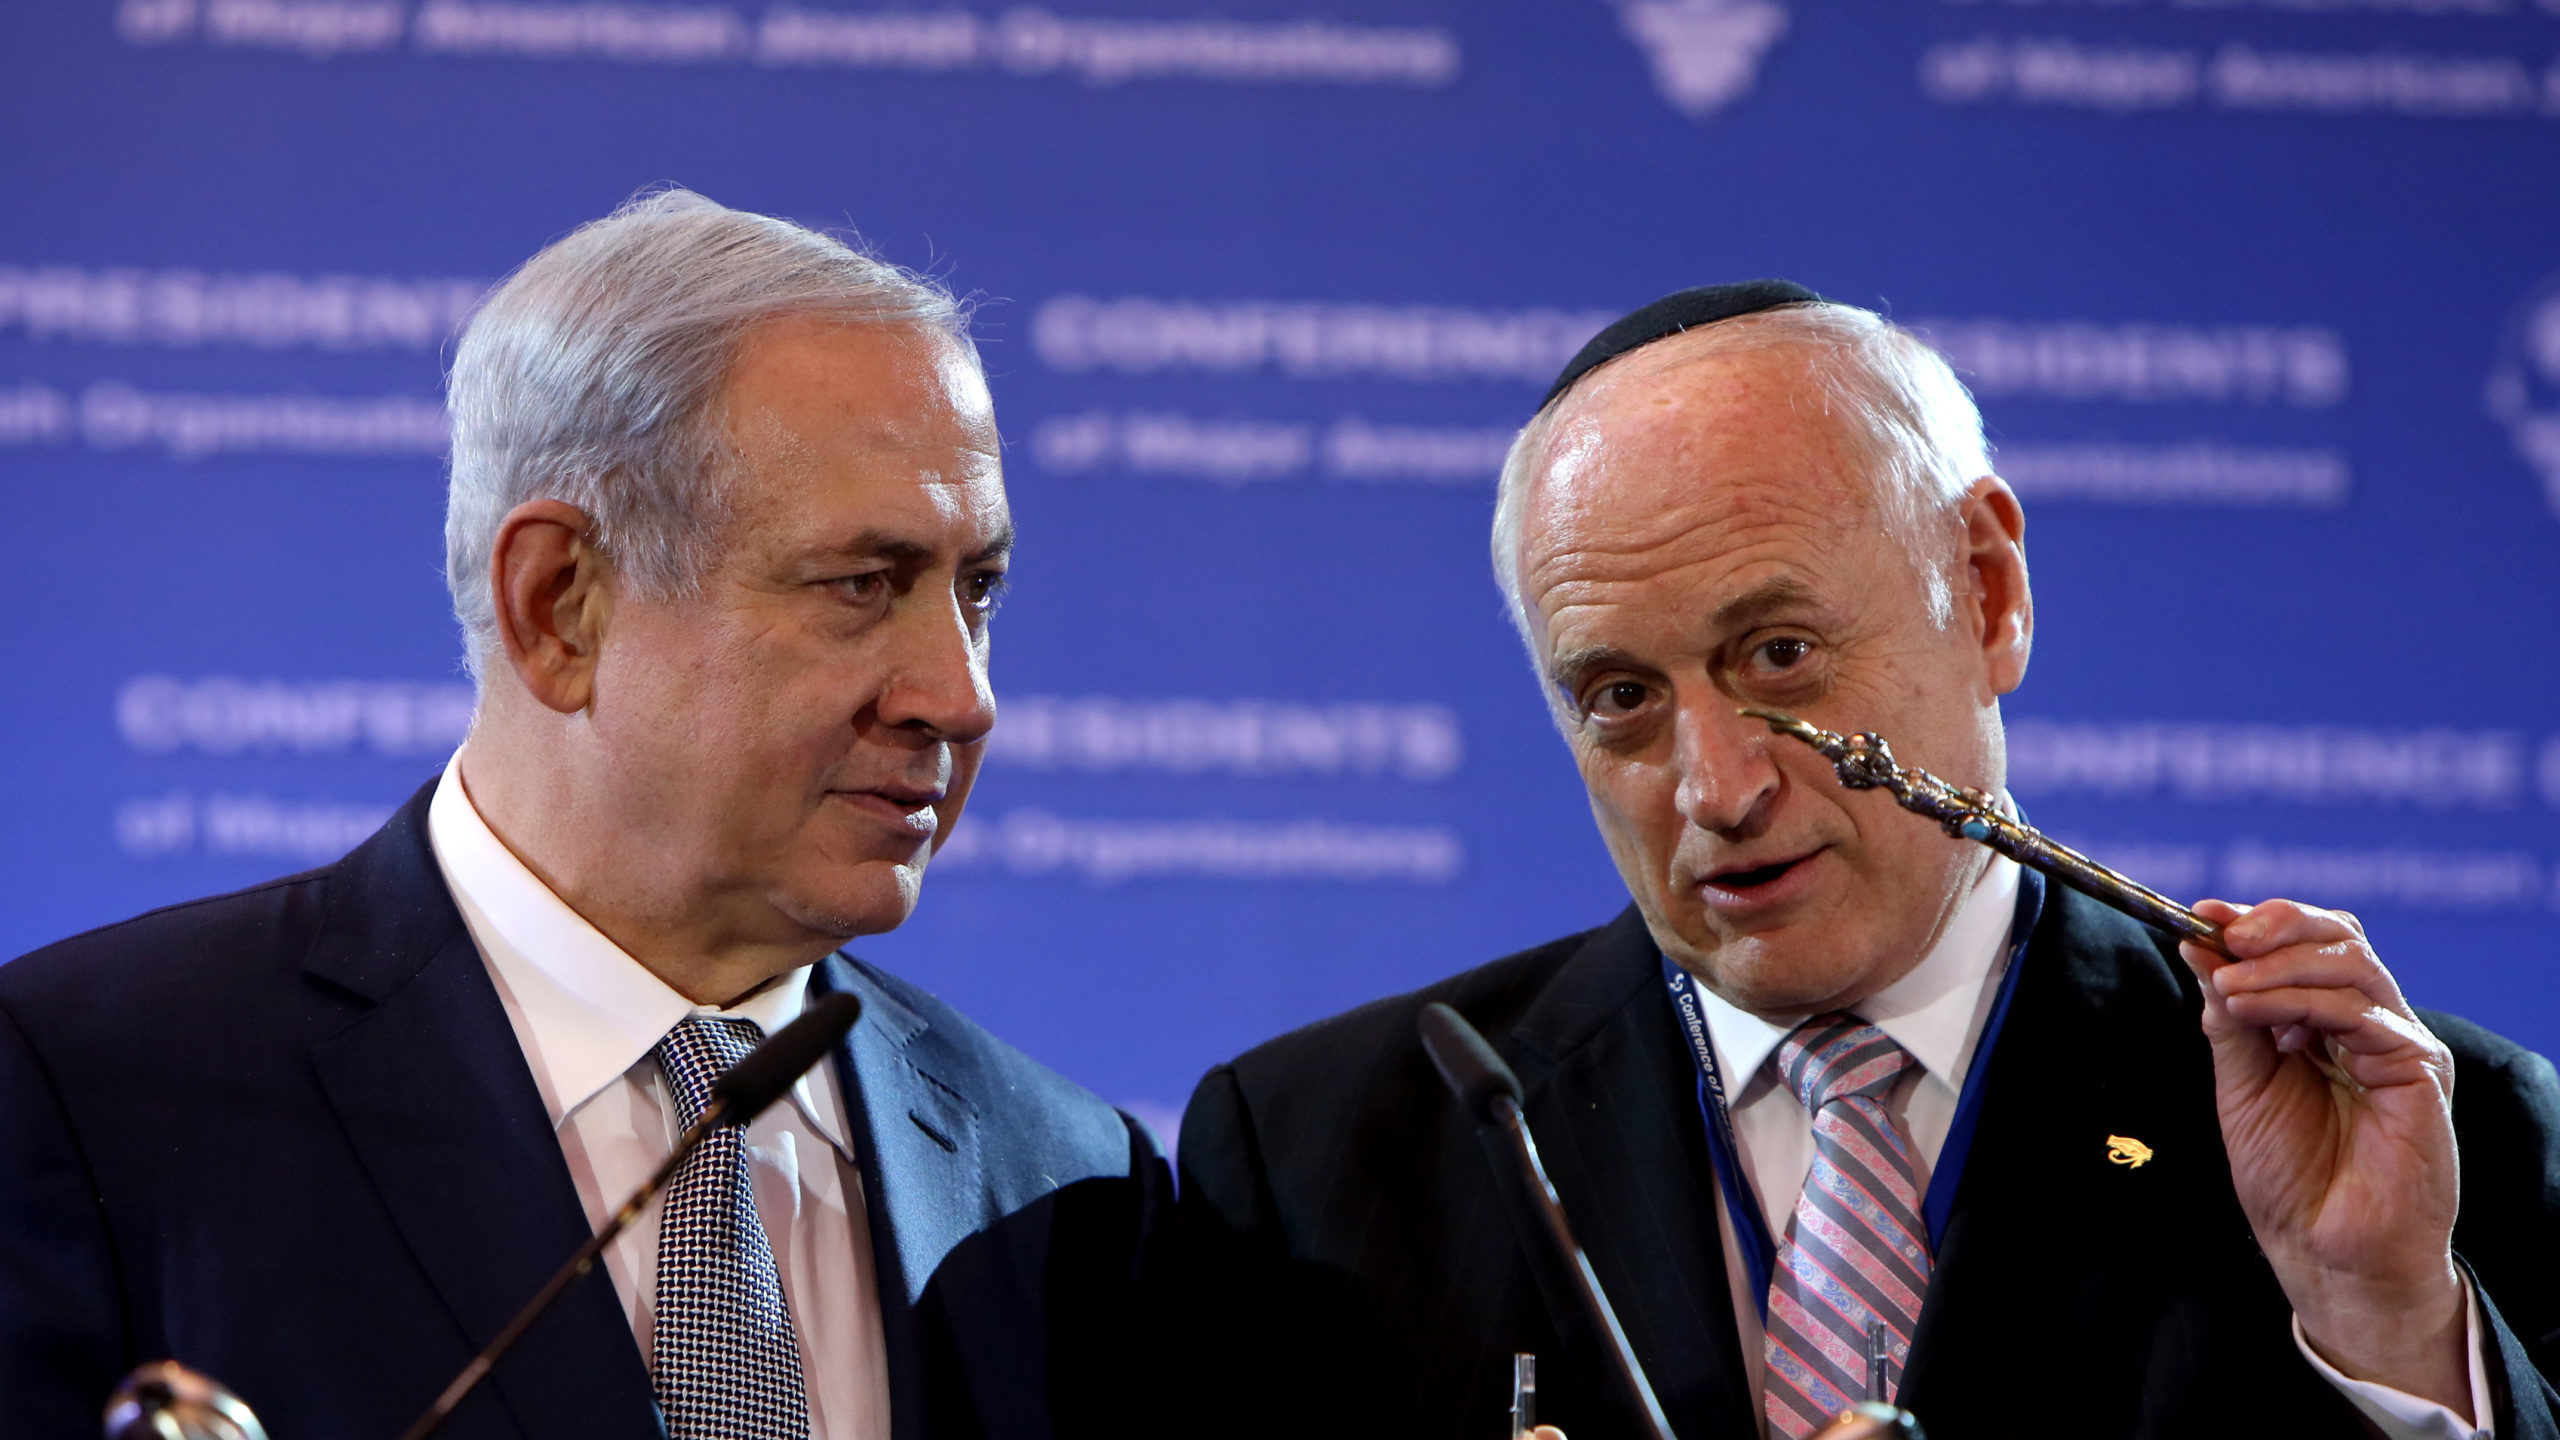 Conference of Jewish Presidents Divided